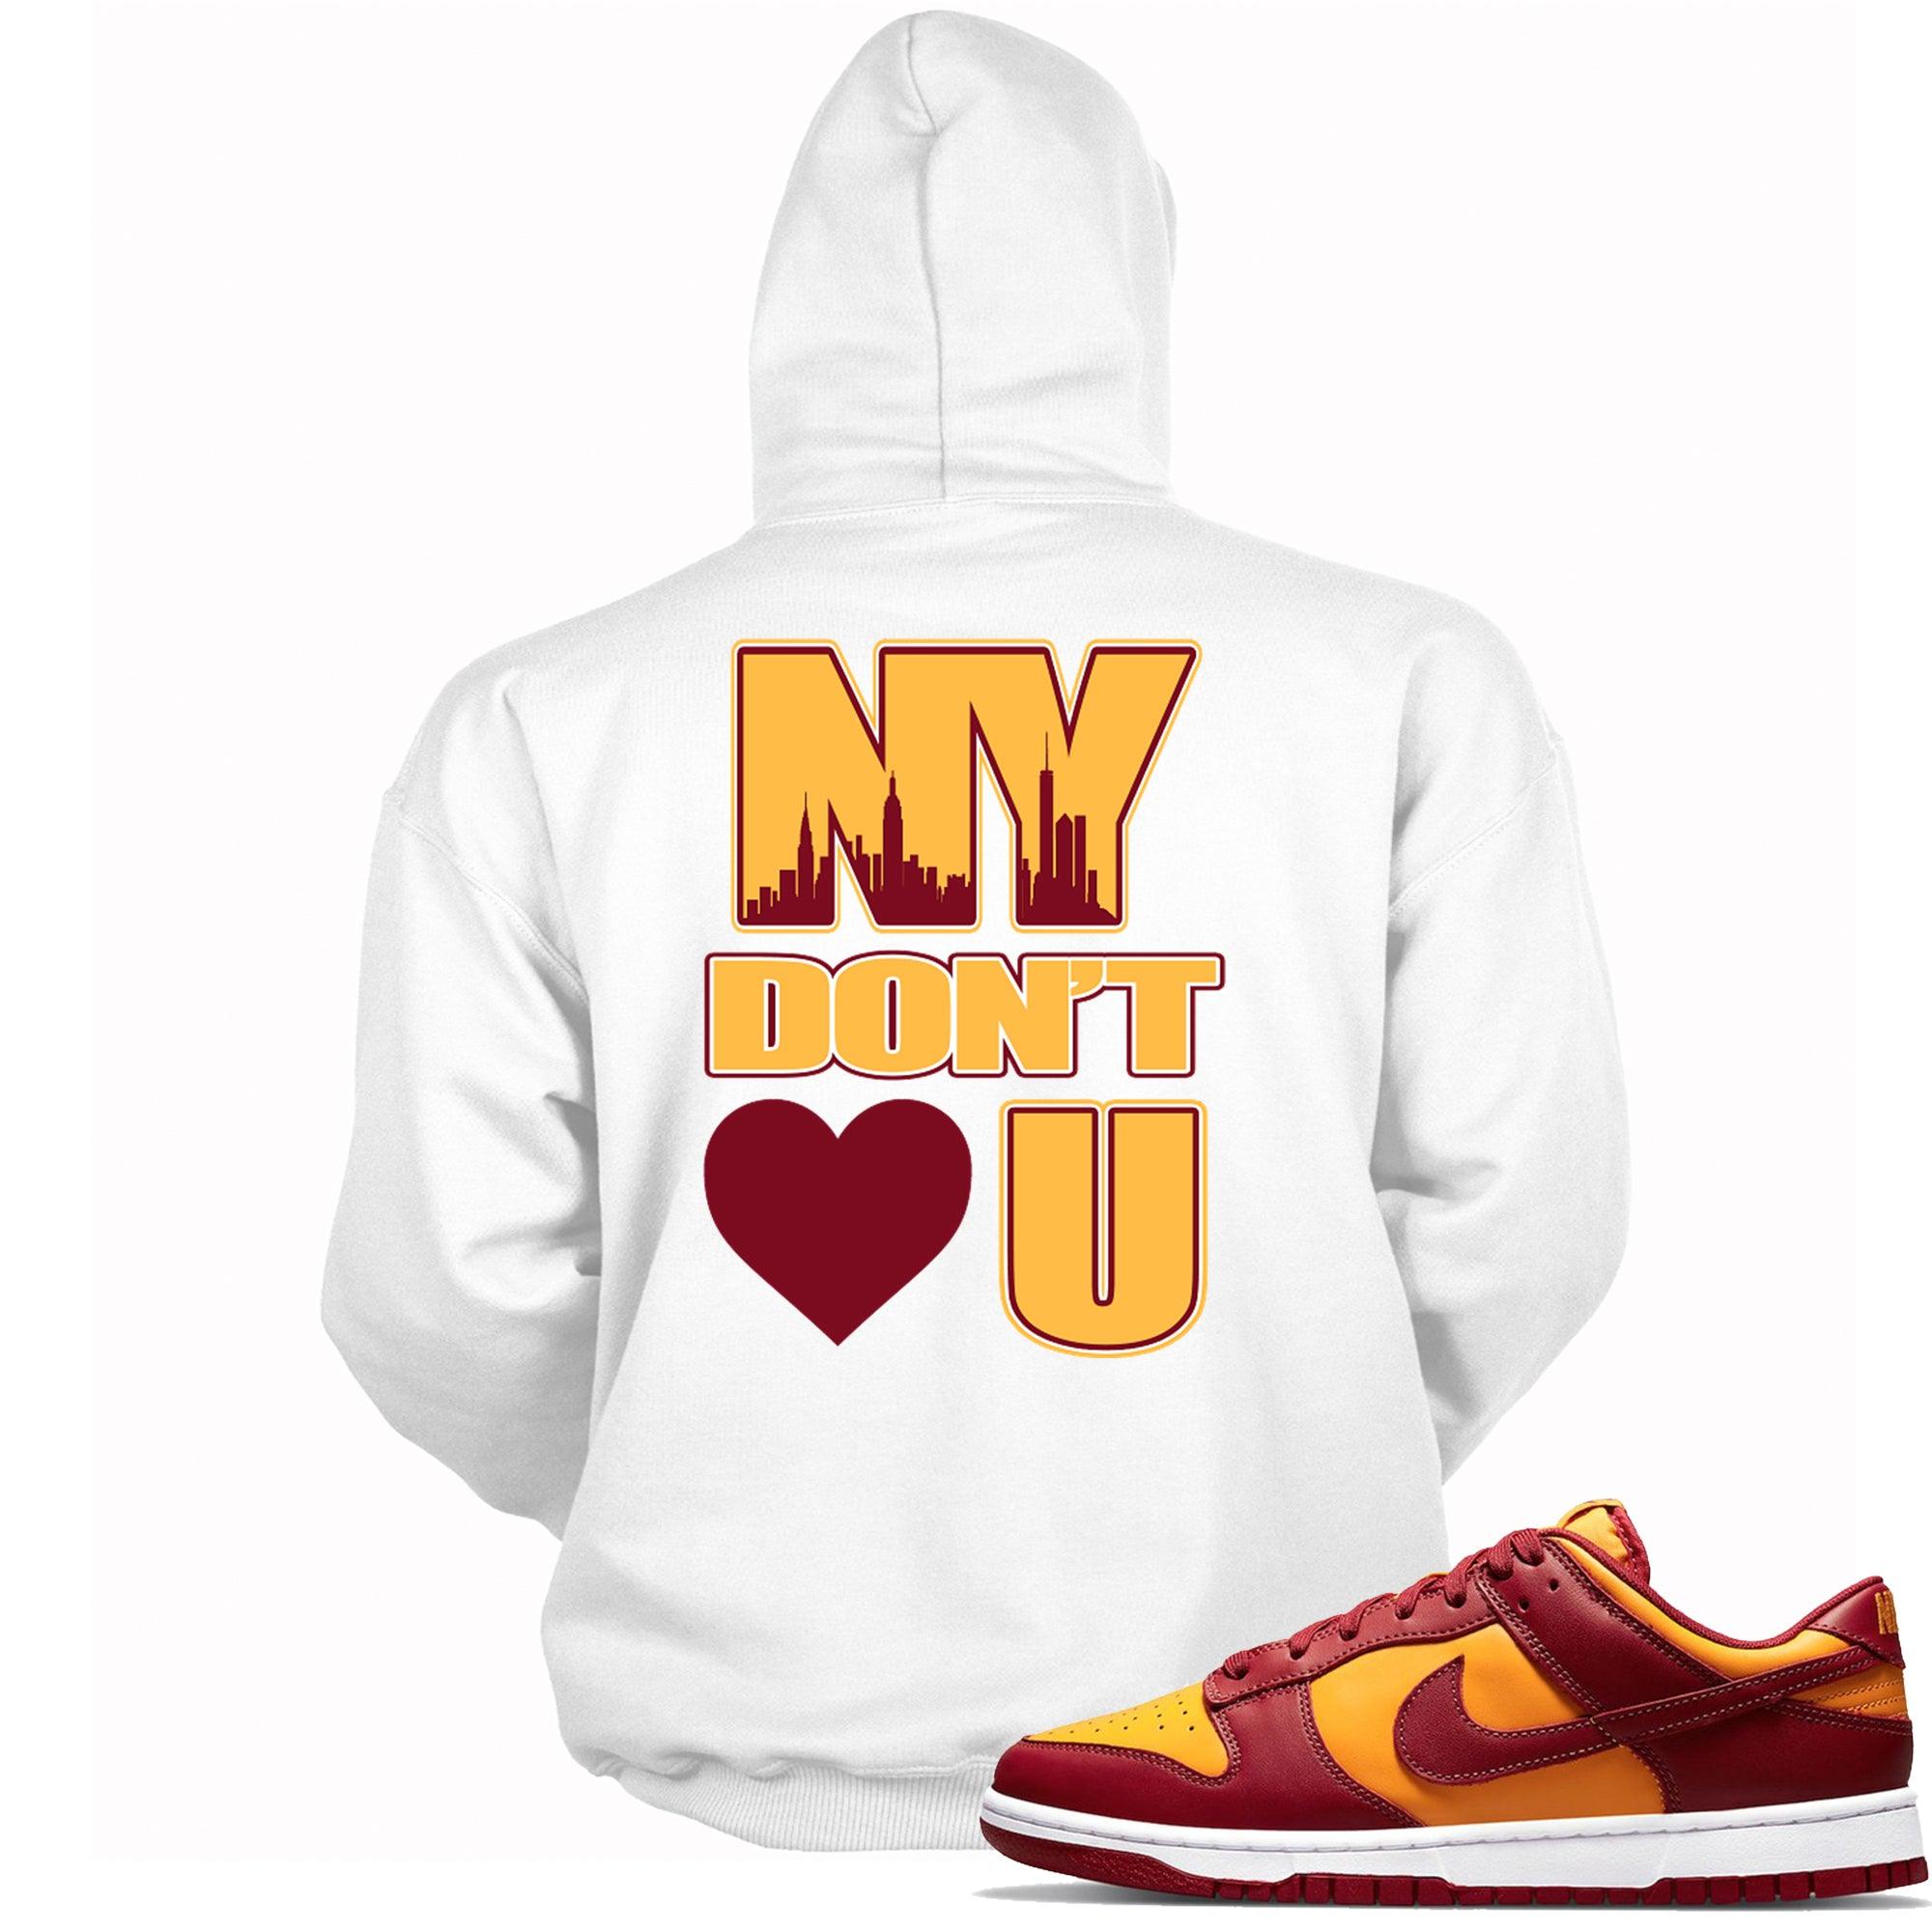 NY Don't Love You Hoodie Nike Dunk Midas Gold photo